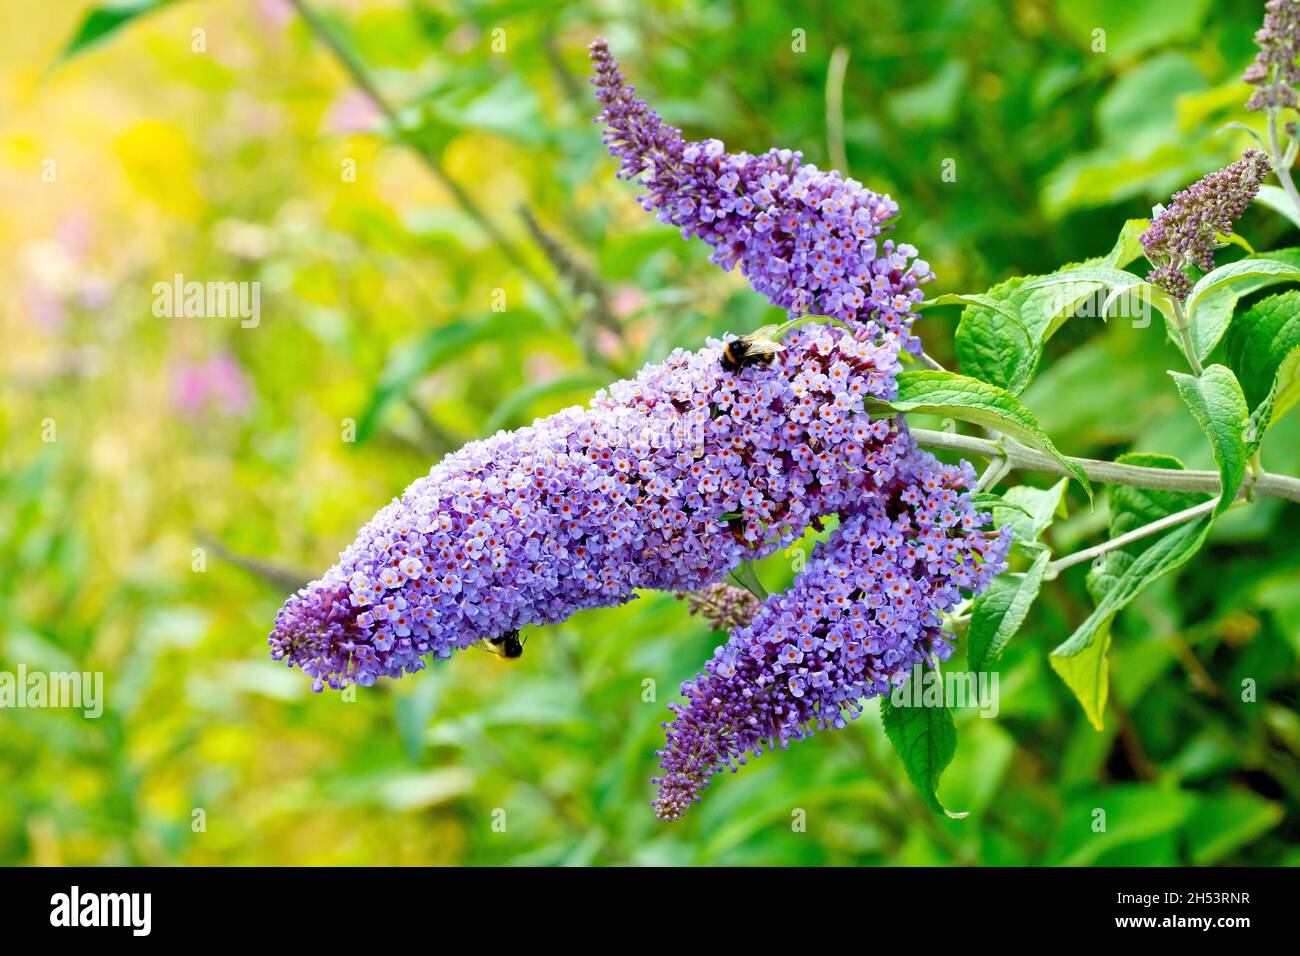 Buddleia or Buddleja (buddleja davidii), also known as Butterfly Bush, close up showing three flowering spikes in full bloom. Stock Photo